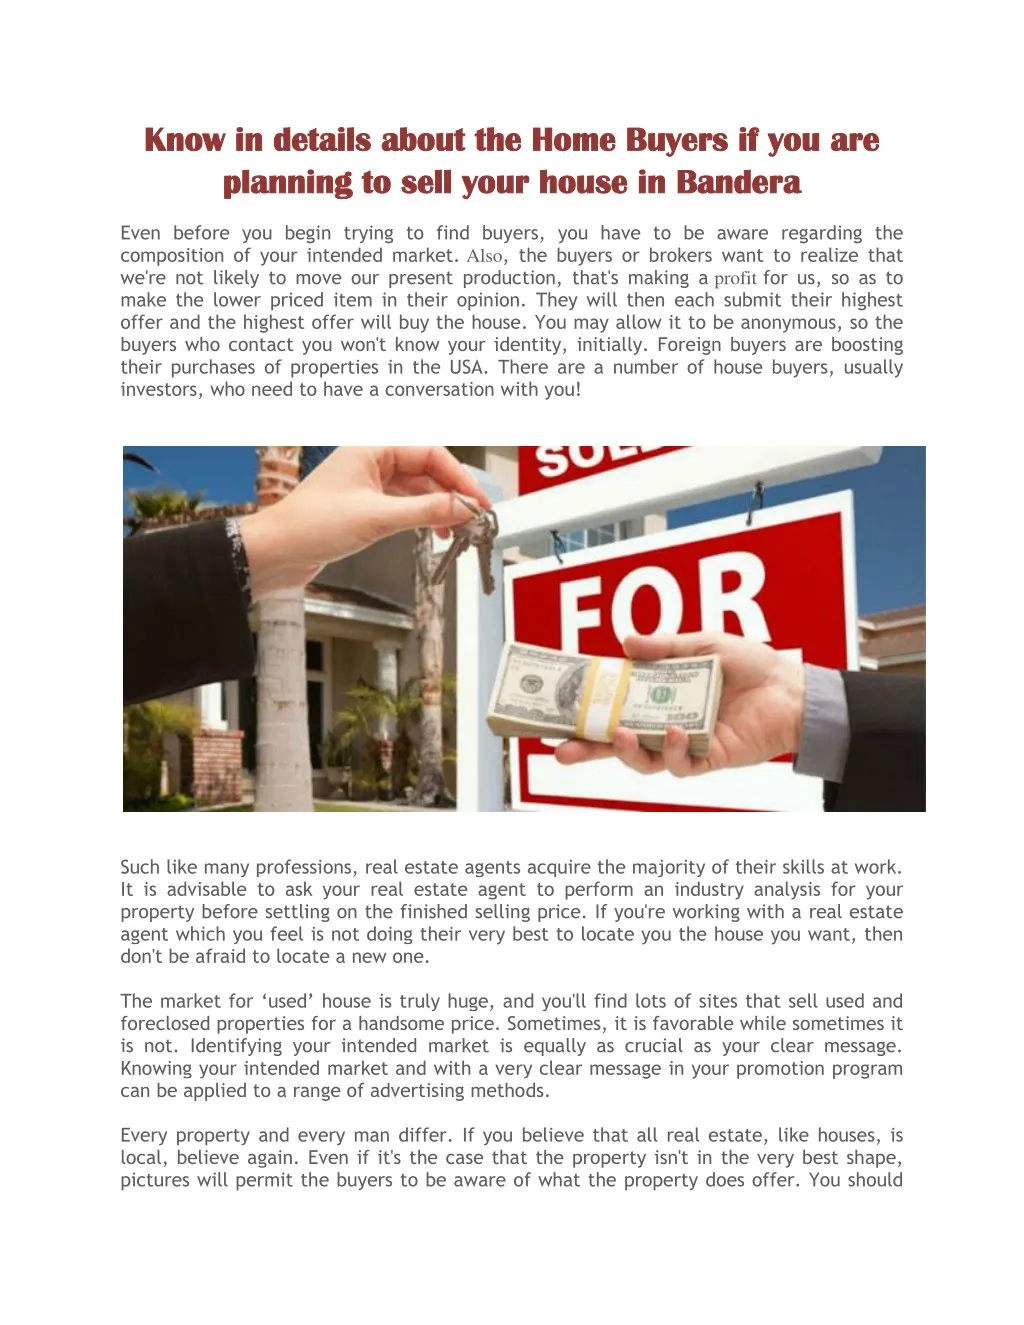 know in details about the home buyers